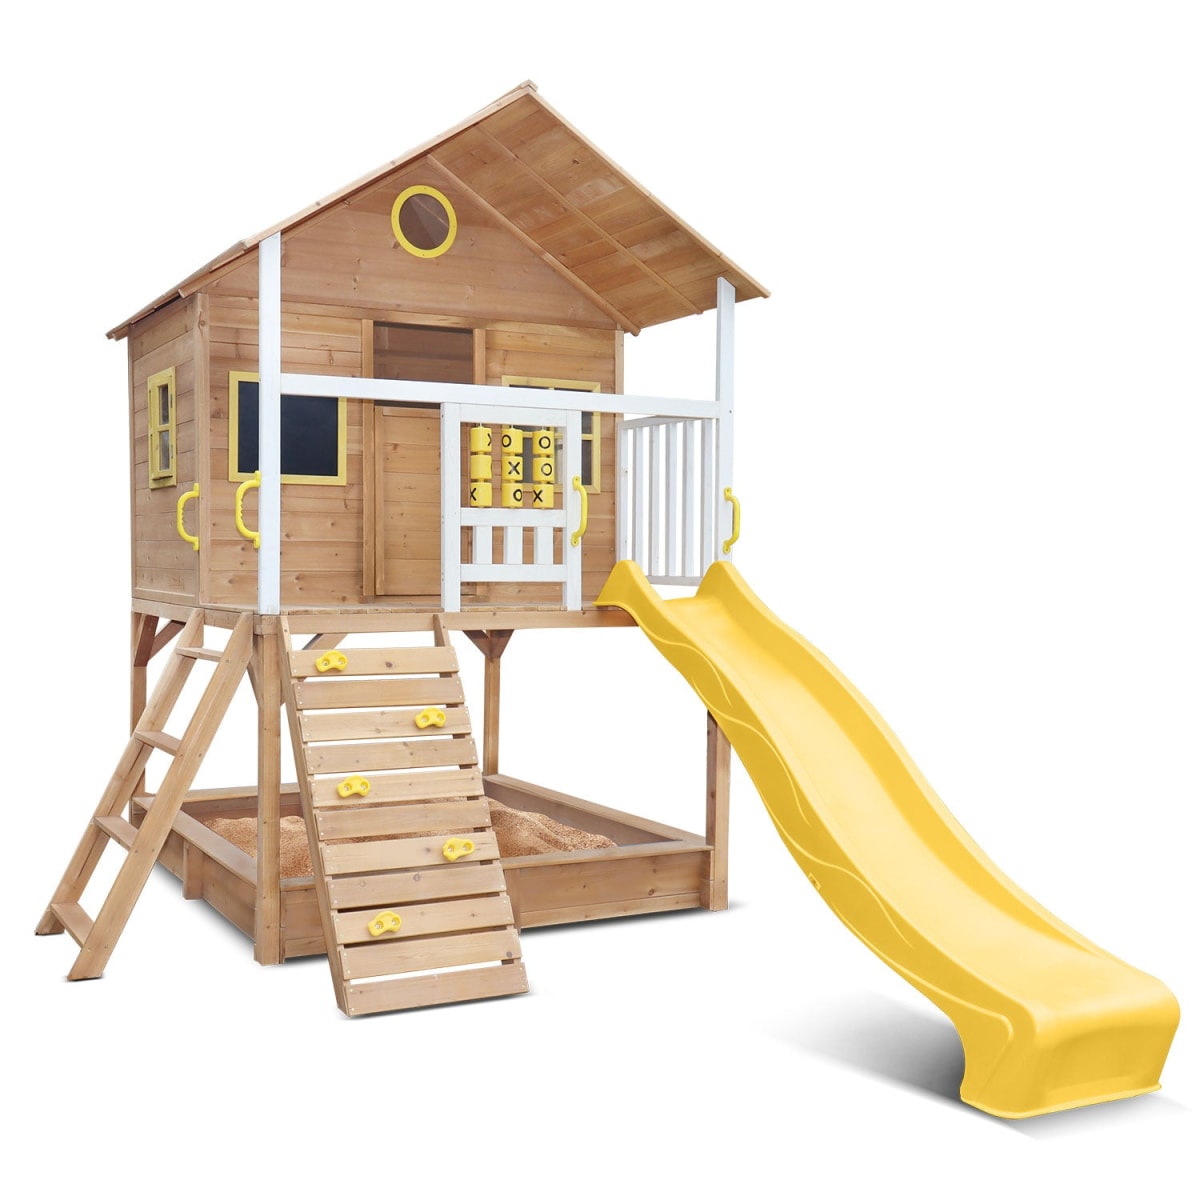 Full image of Warrigal Cubby House with yellow slide in white background